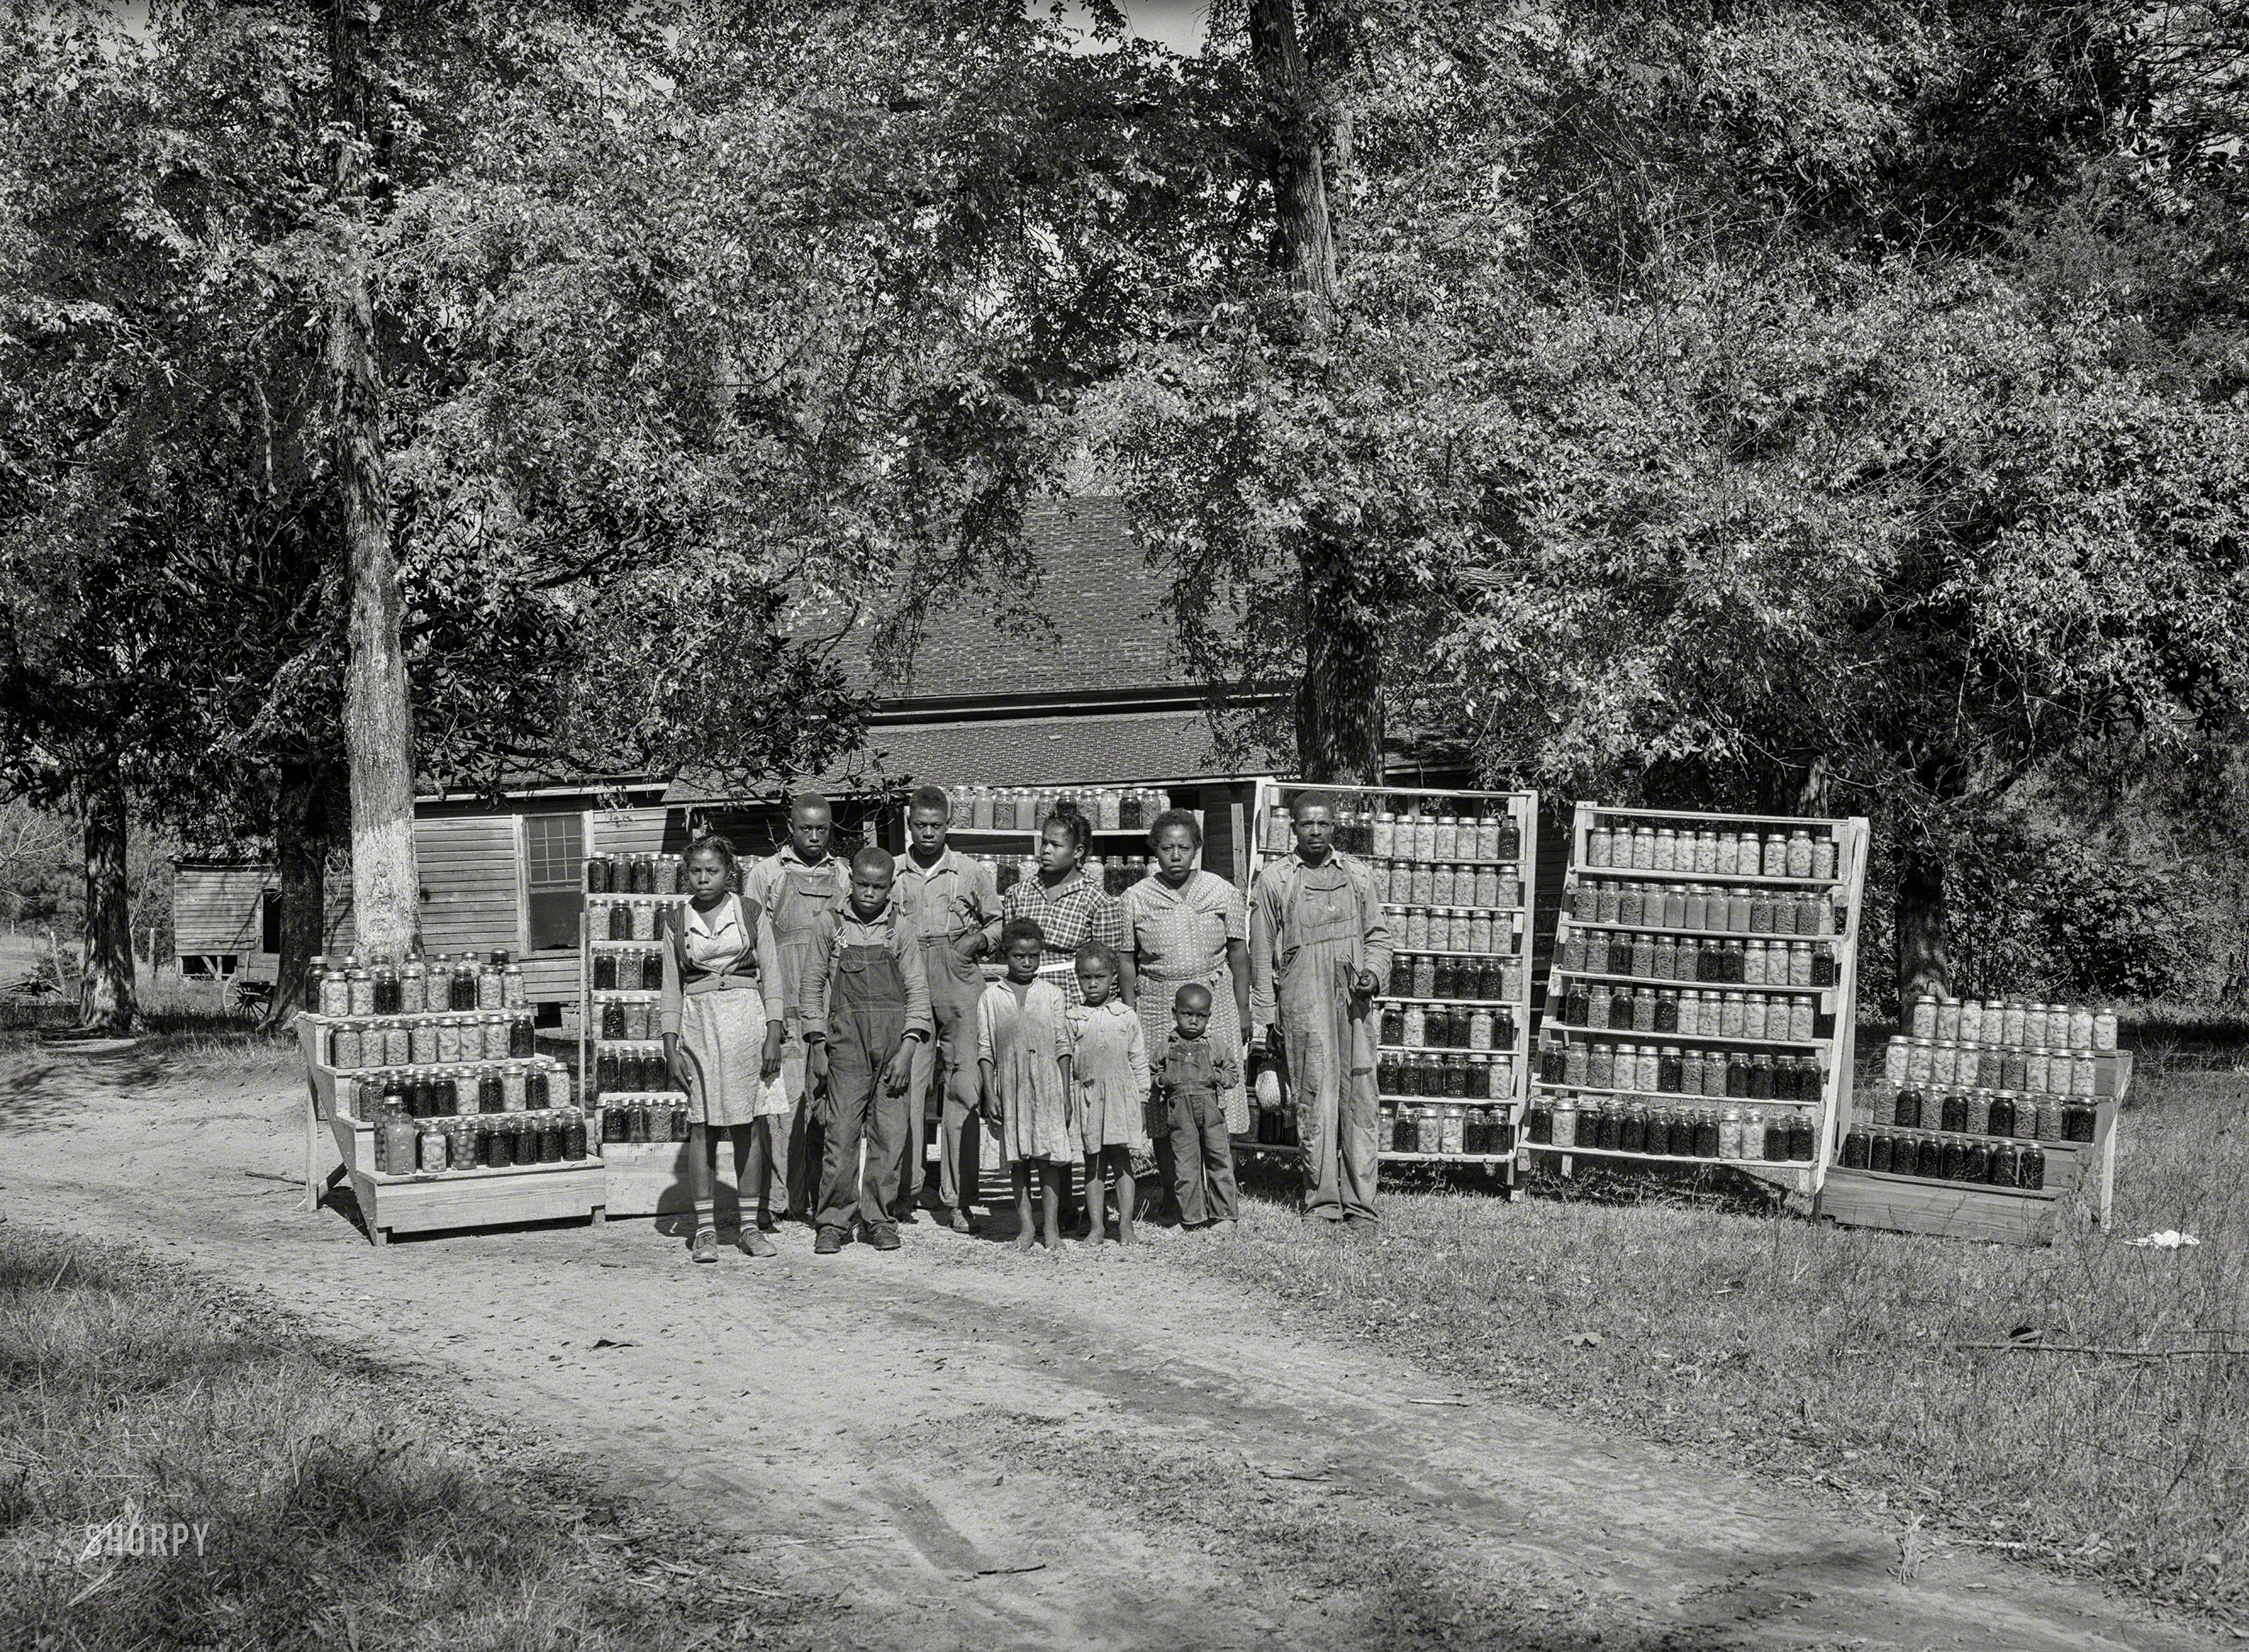 October 1941. Greene County, Georgia. "Canned goods made by Doc and Julia Miller, Farm Security Administration clients with 1,000 jars of fruit, vegetables, etc. they have put up for the winter." Yet another farm family exhausted after indulging the whims of FSA photographer Jack Delano. View full size.